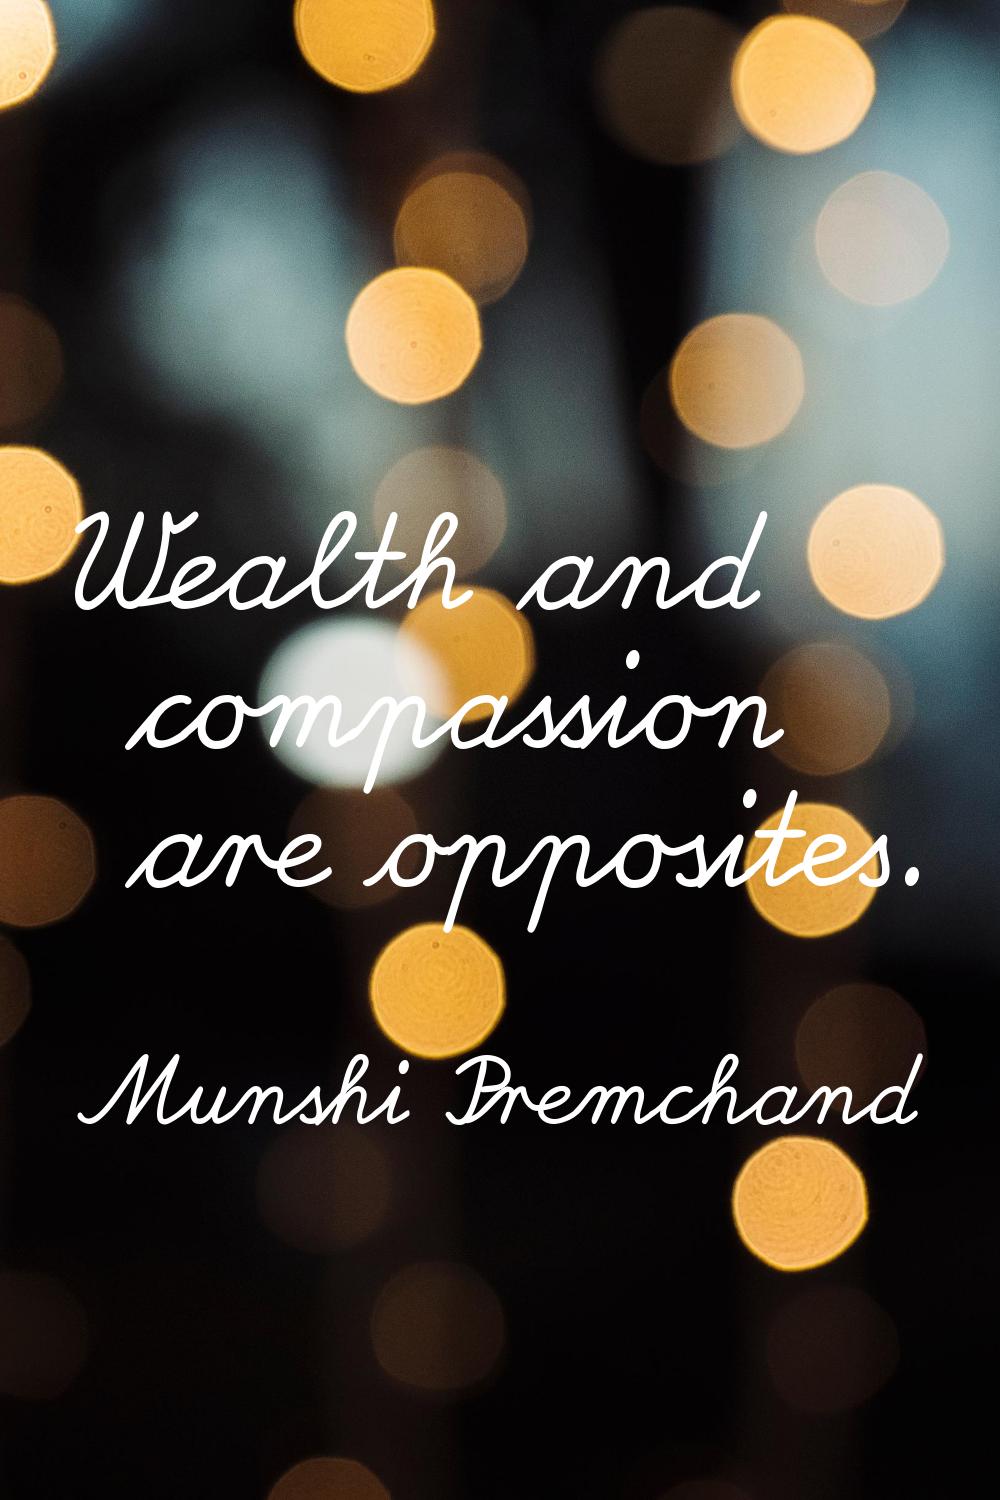 Wealth and compassion are opposites.